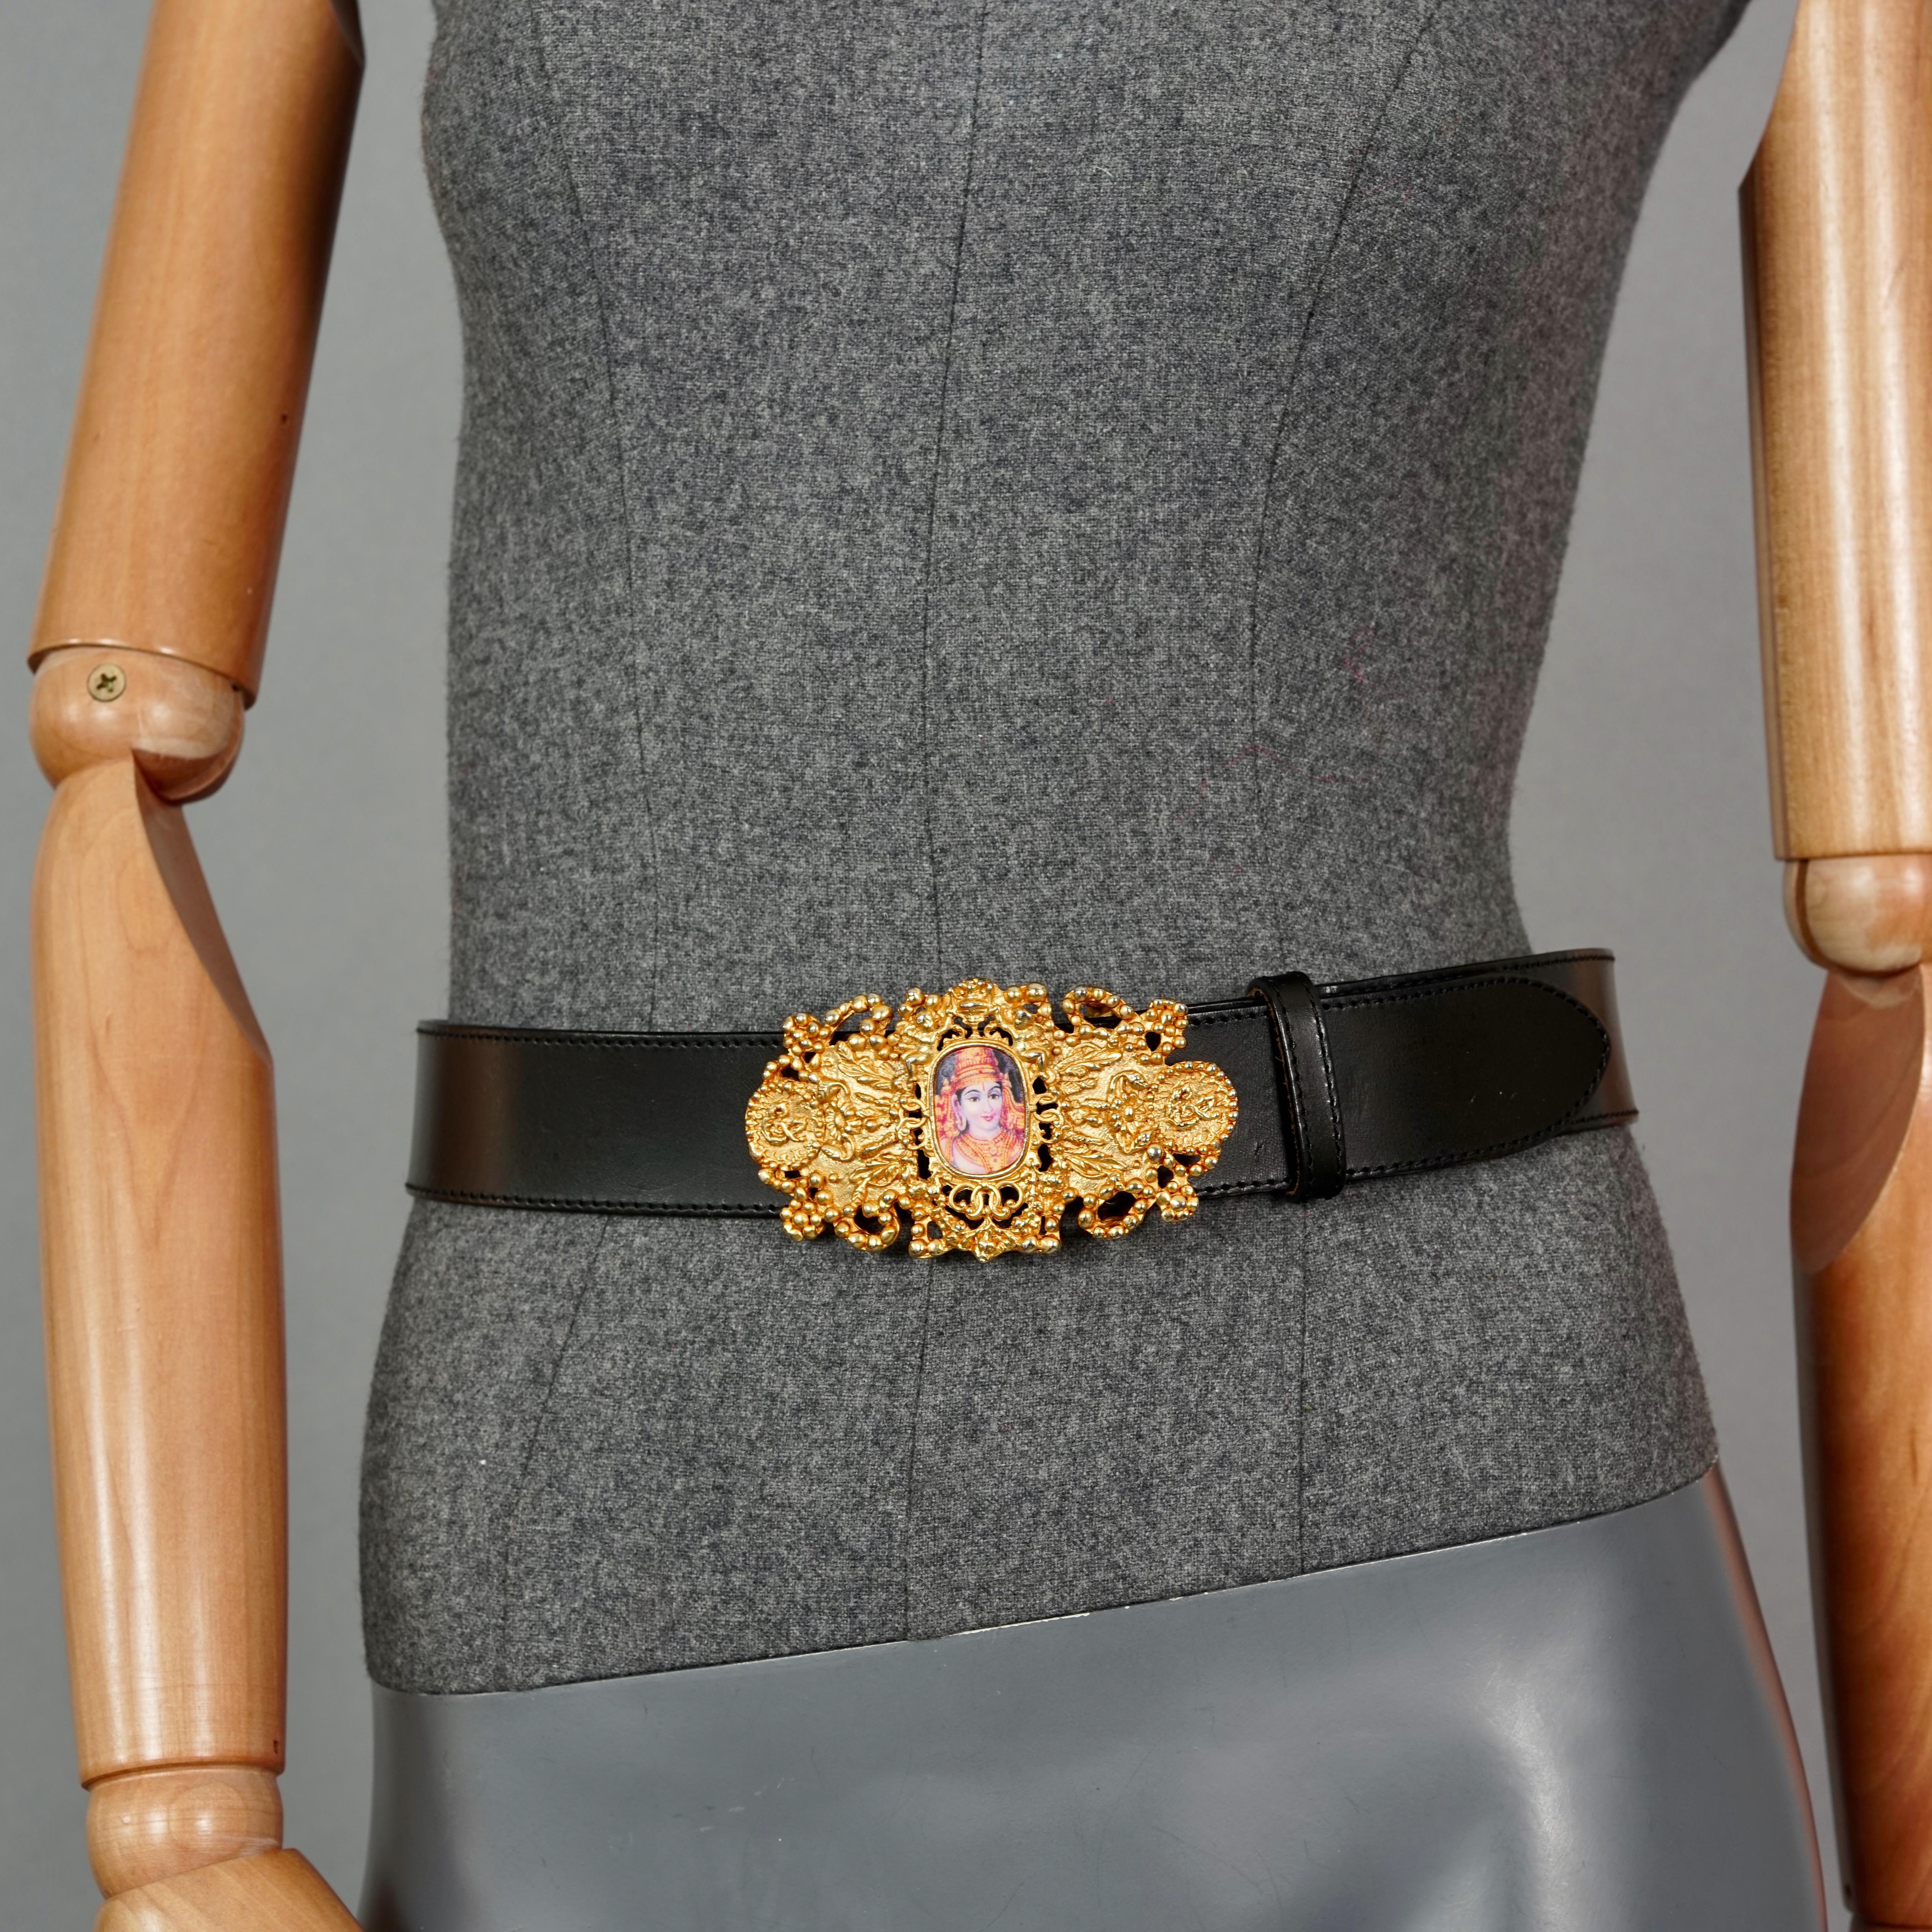 Vintage CHRISTIAN LACROIX Indian Maharani Profile Gilt Frame Buckle Belt

Measurements:
Buckle Height: 2.05 inches (5.2 cm)
Buckle Width: 3.94 inches (10 cm)
Wearable Length: 27.55 inches to 29.52 inches (70 cm to 75 cm) adjustable

Features:
- 100%